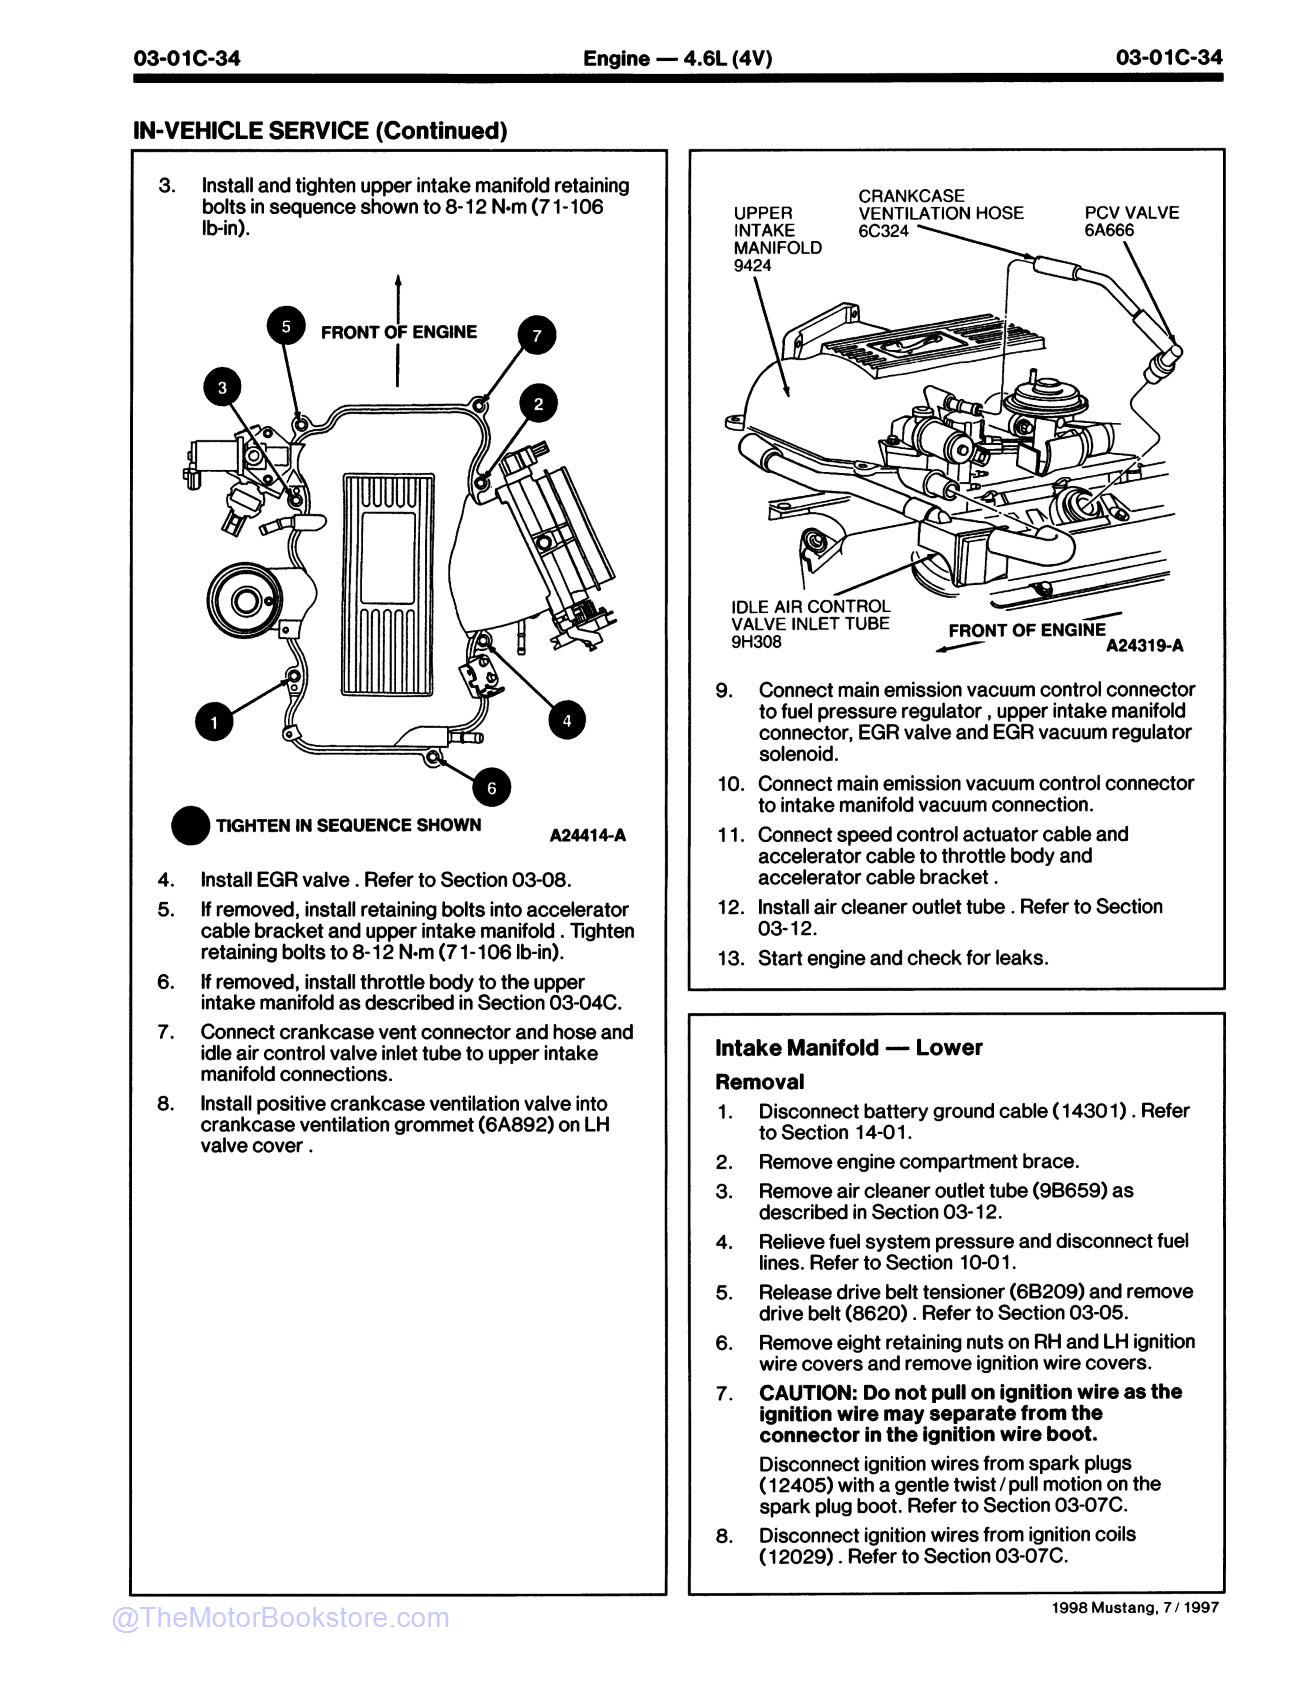 1998 Ford Mustang Service Manual - Sample Page 1